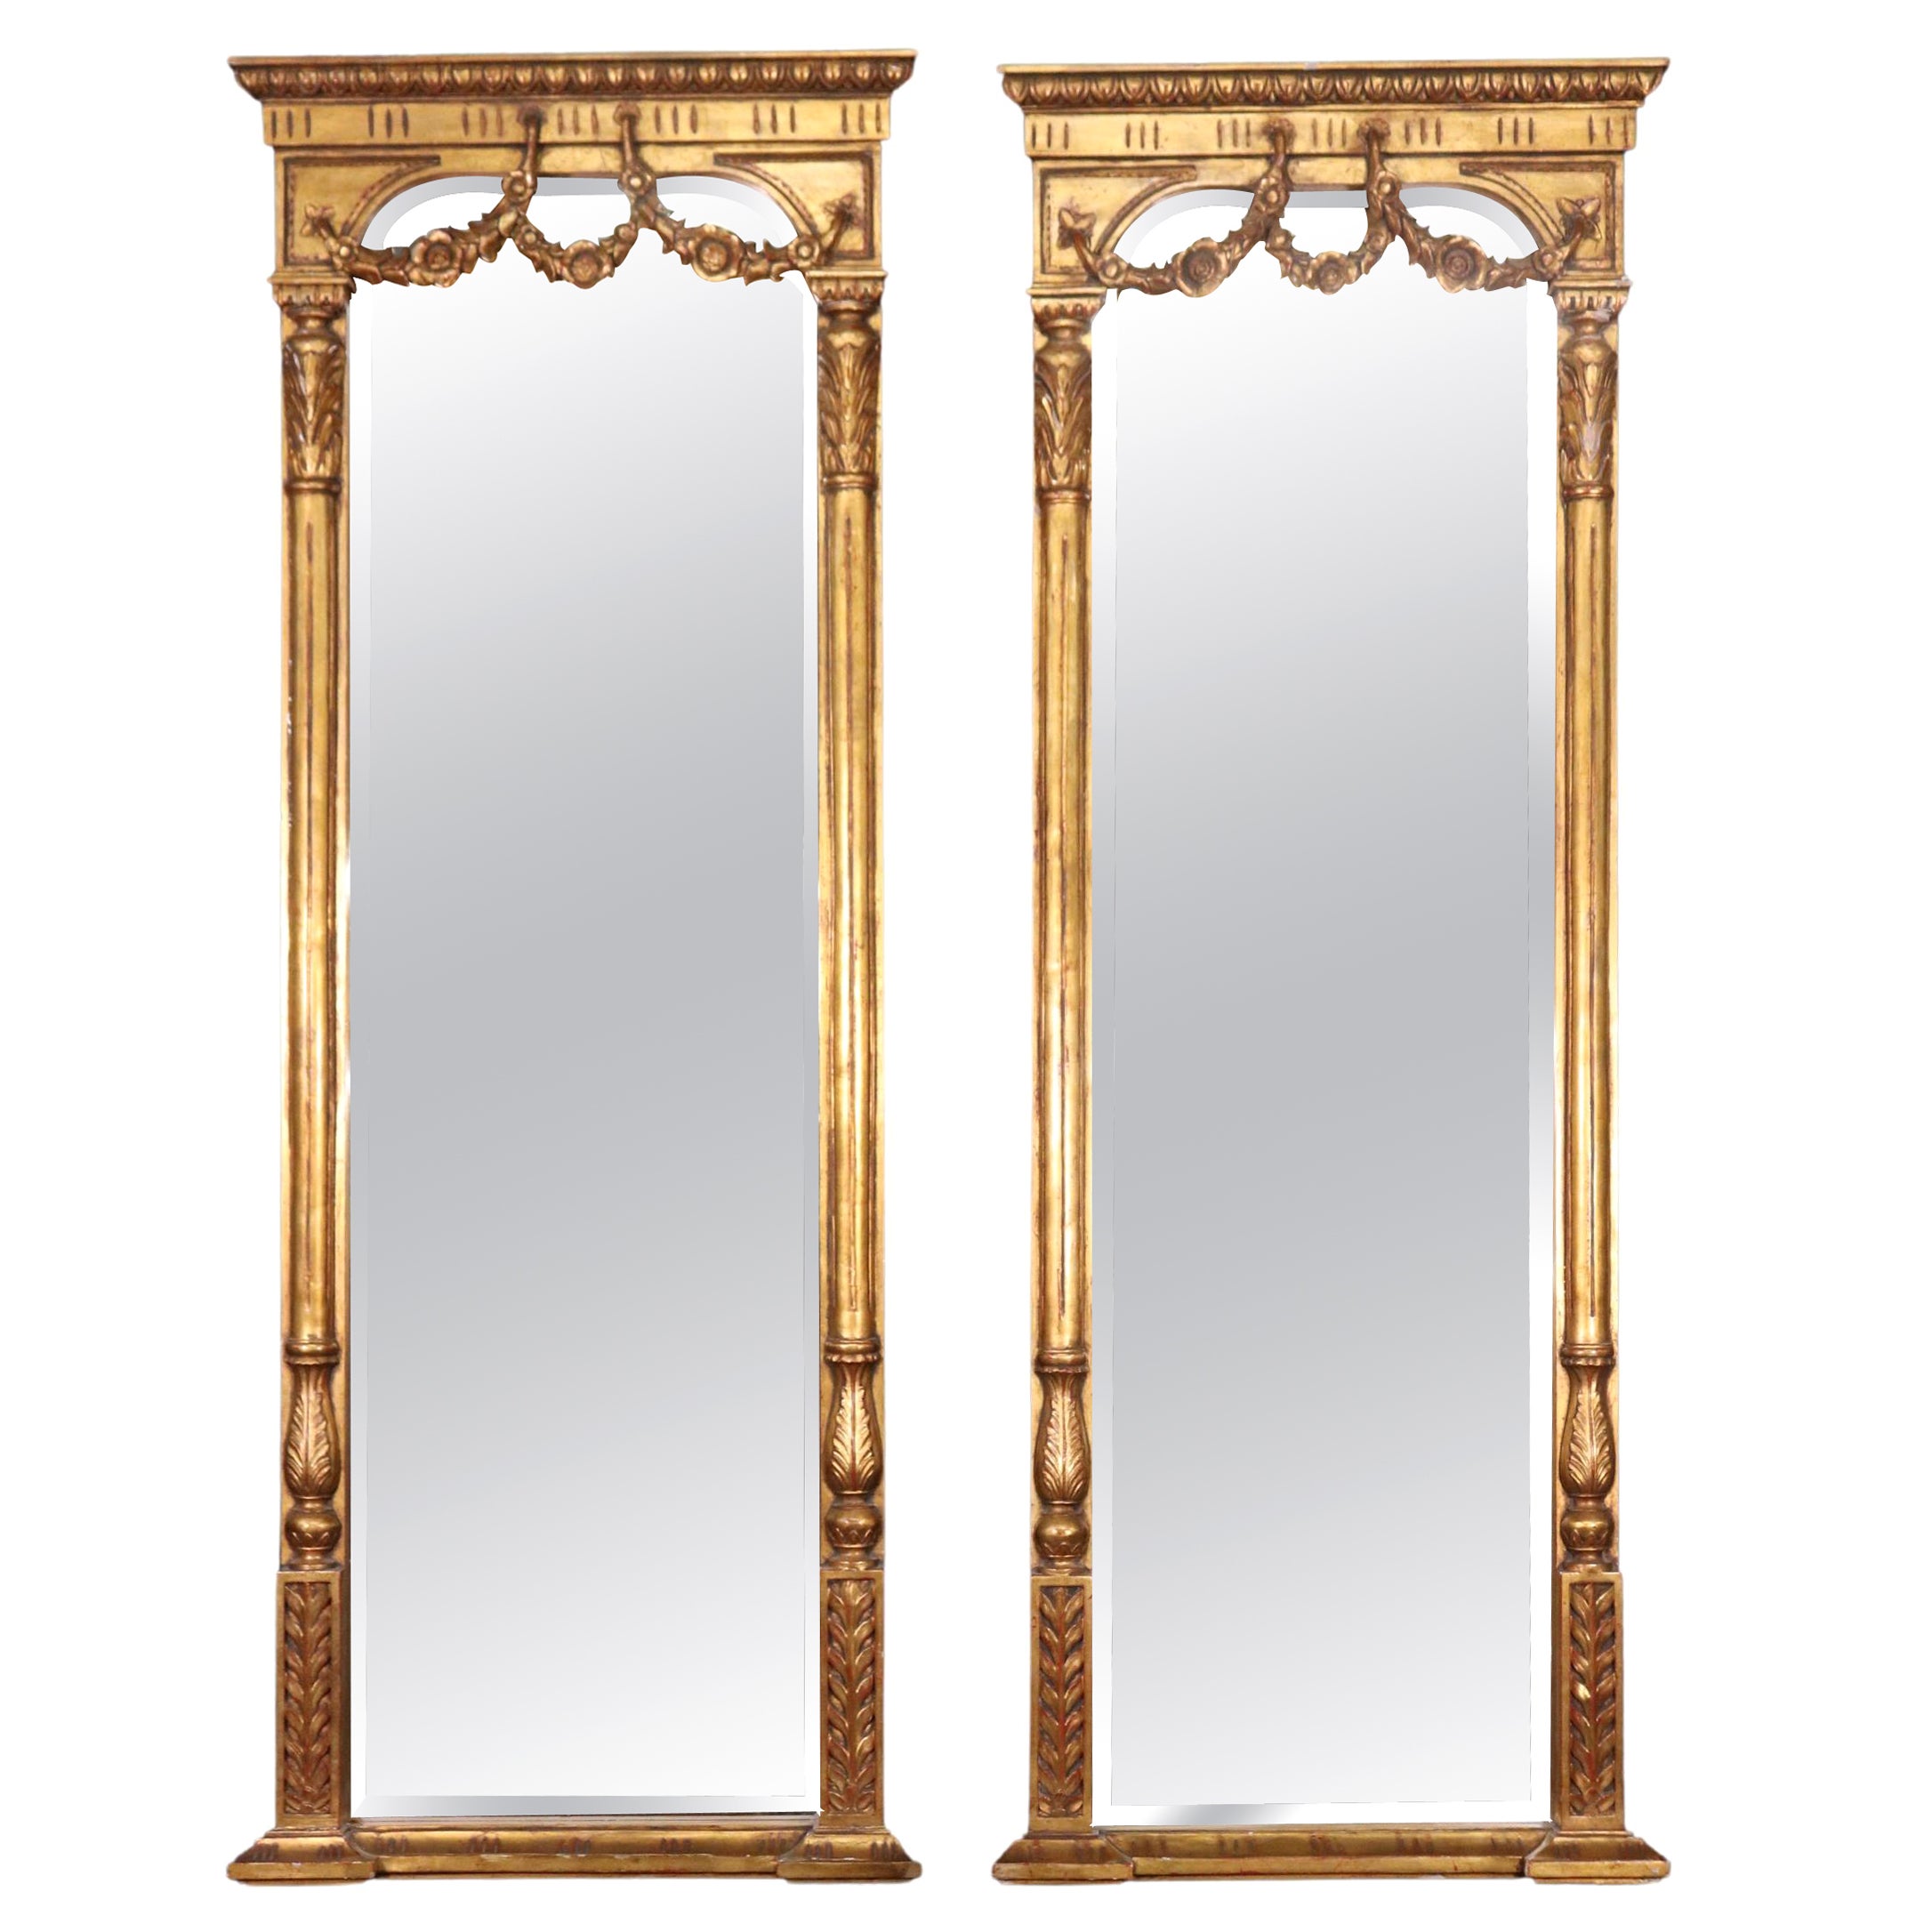 Pair of Gilded Italian Louis XV Style Carved Wall Pier Mirrors circa 1940